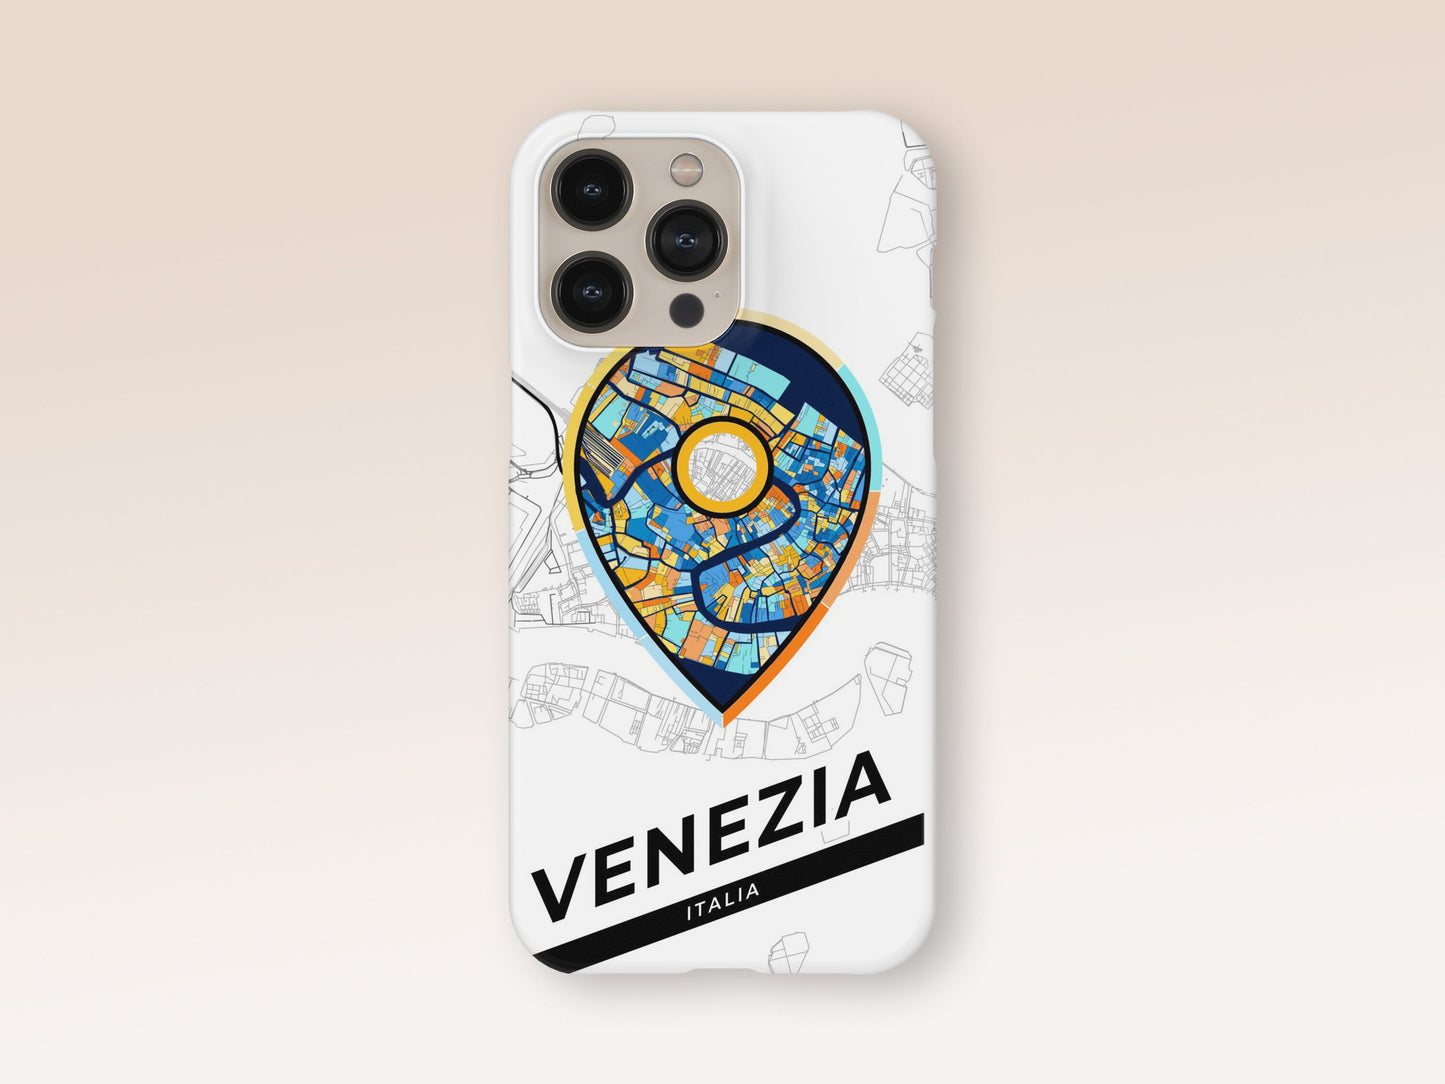 Venice Italy slim phone case with colorful icon 1